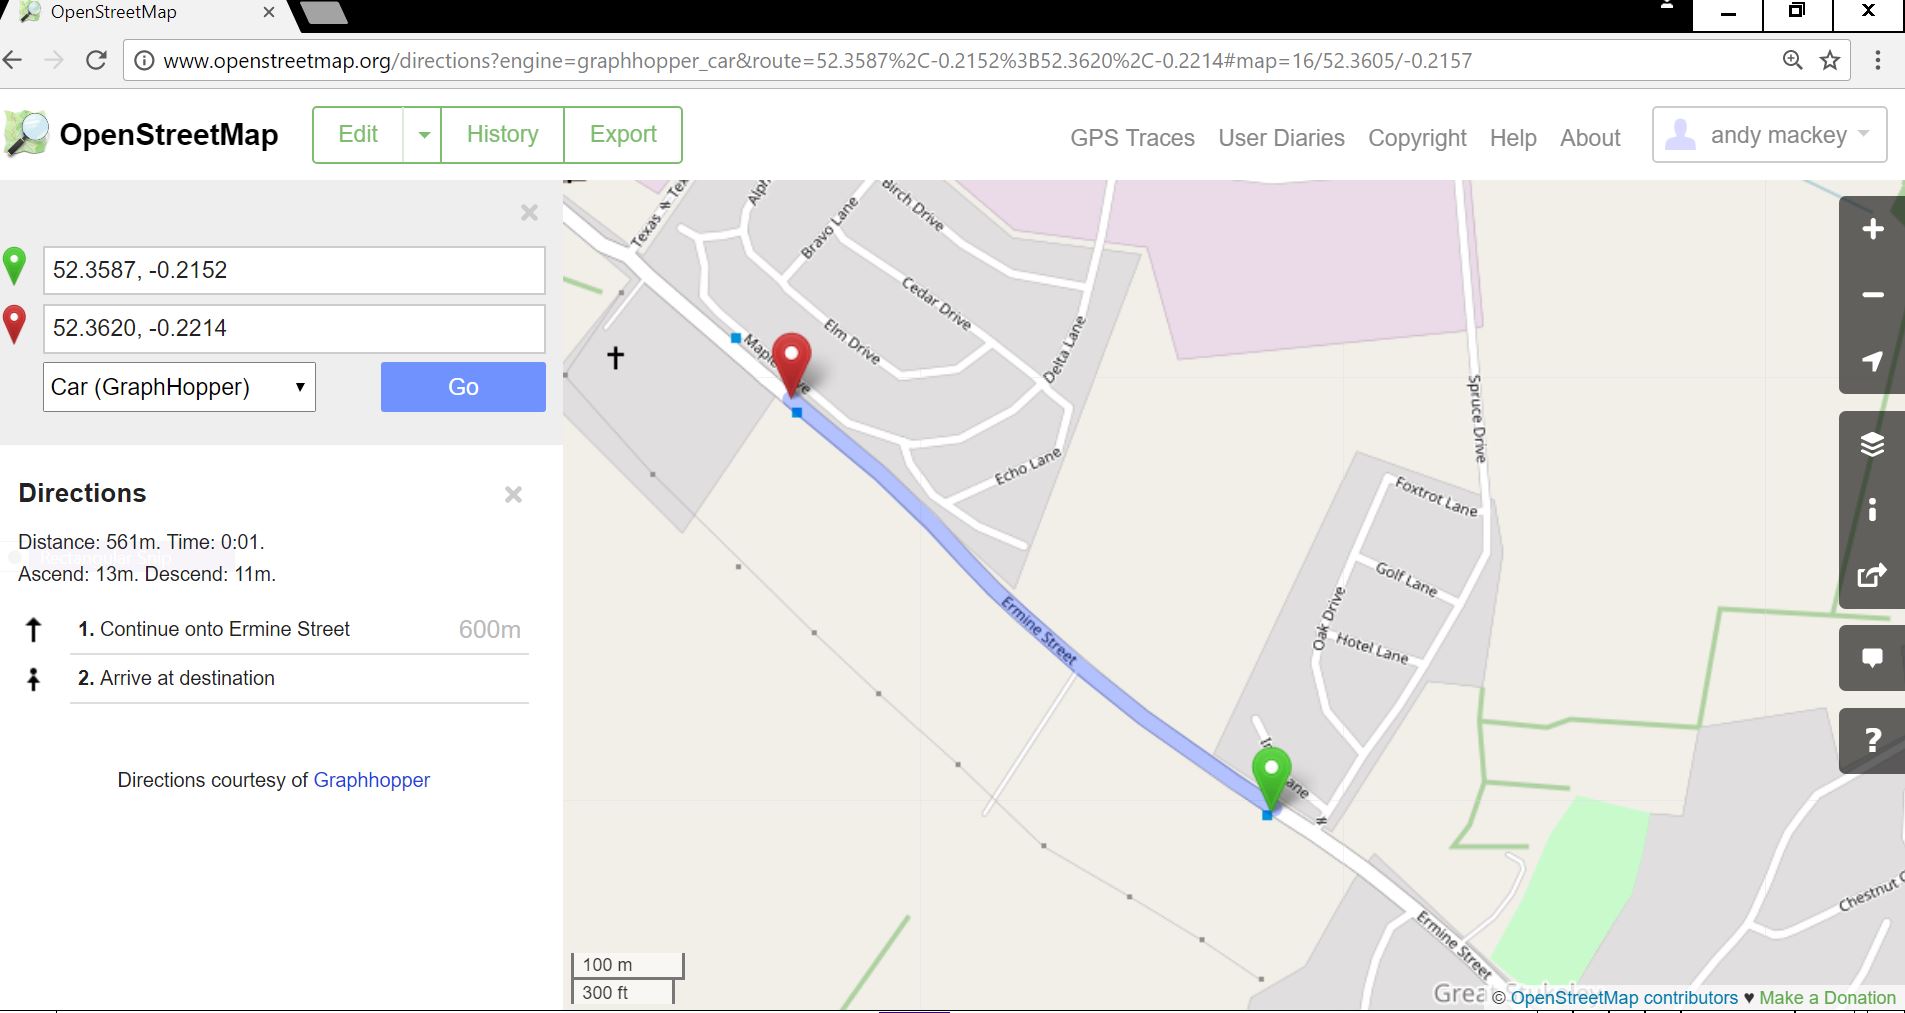 Cava General inteligente How can I calculate the distance between stops of public transport routes?  - OSM Help